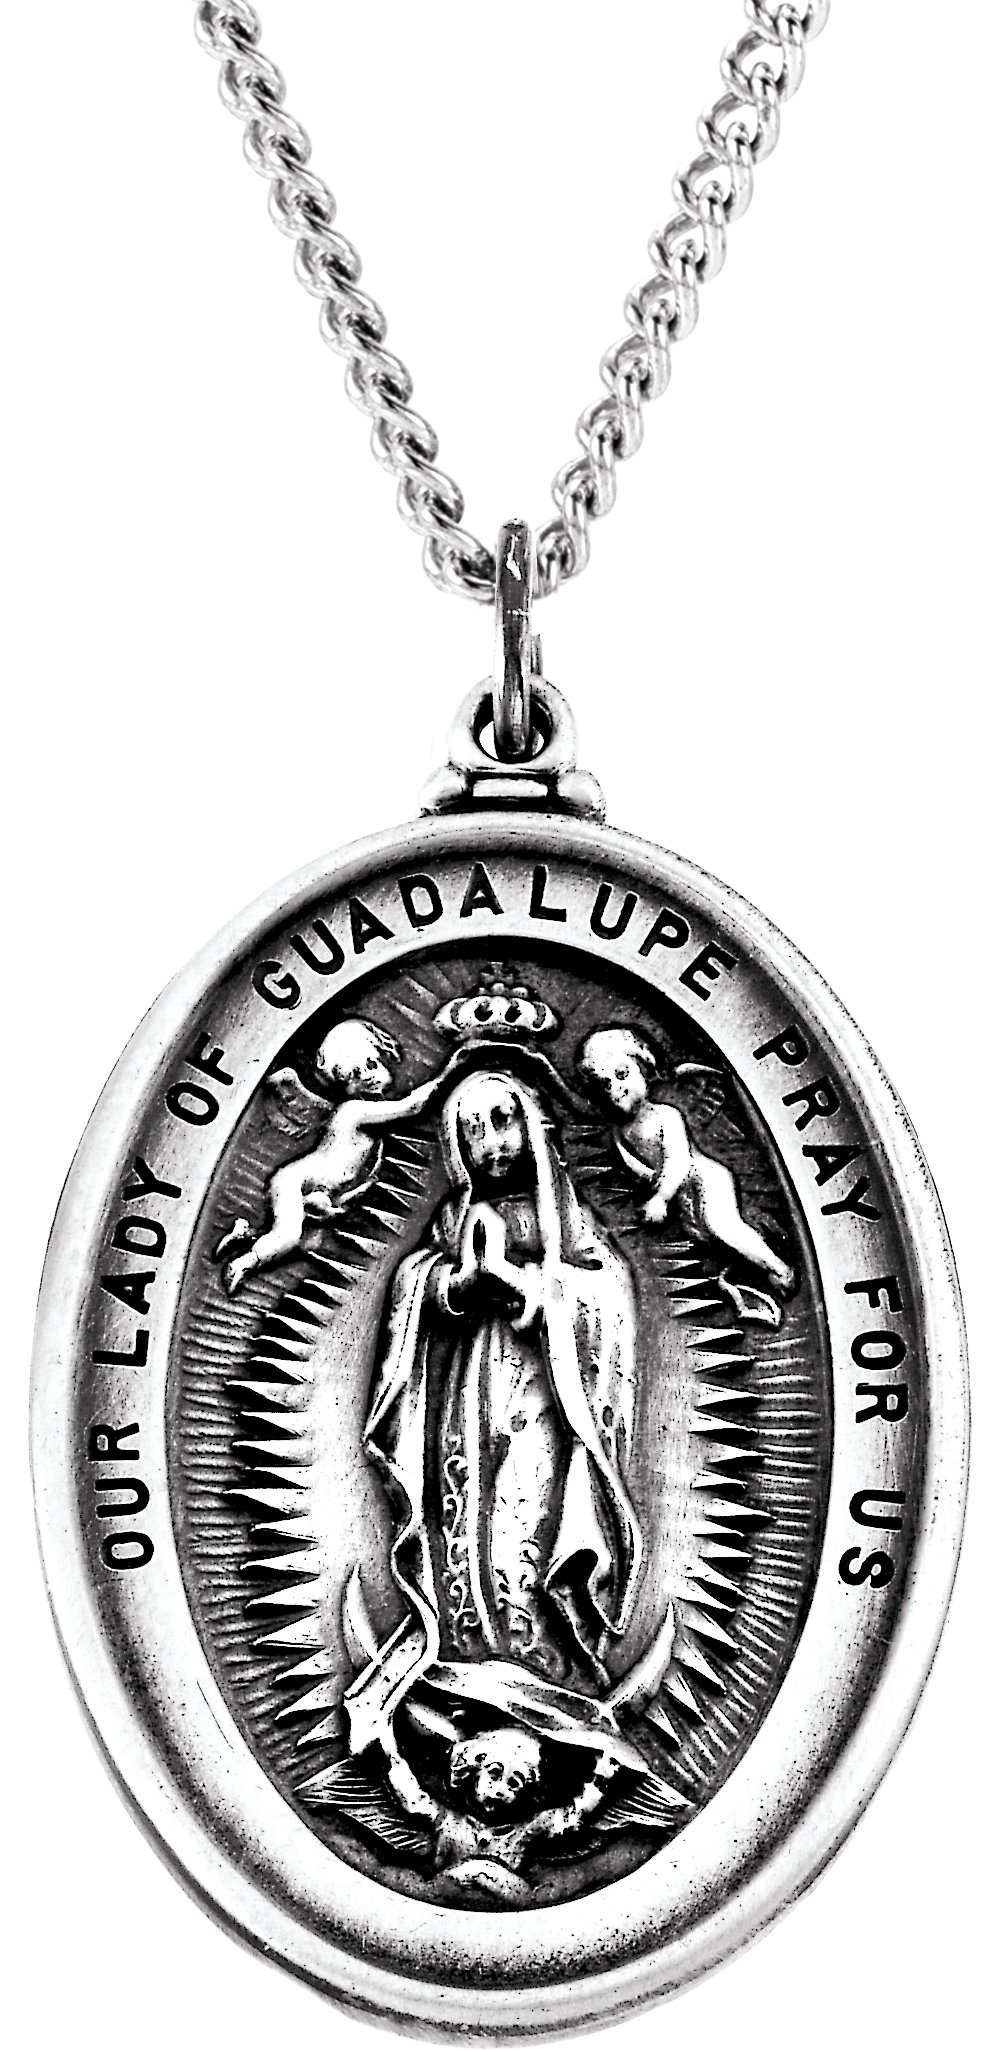 Our Lady Of Guadalupe Medal 34.25 x 25.75mm Ref 717049